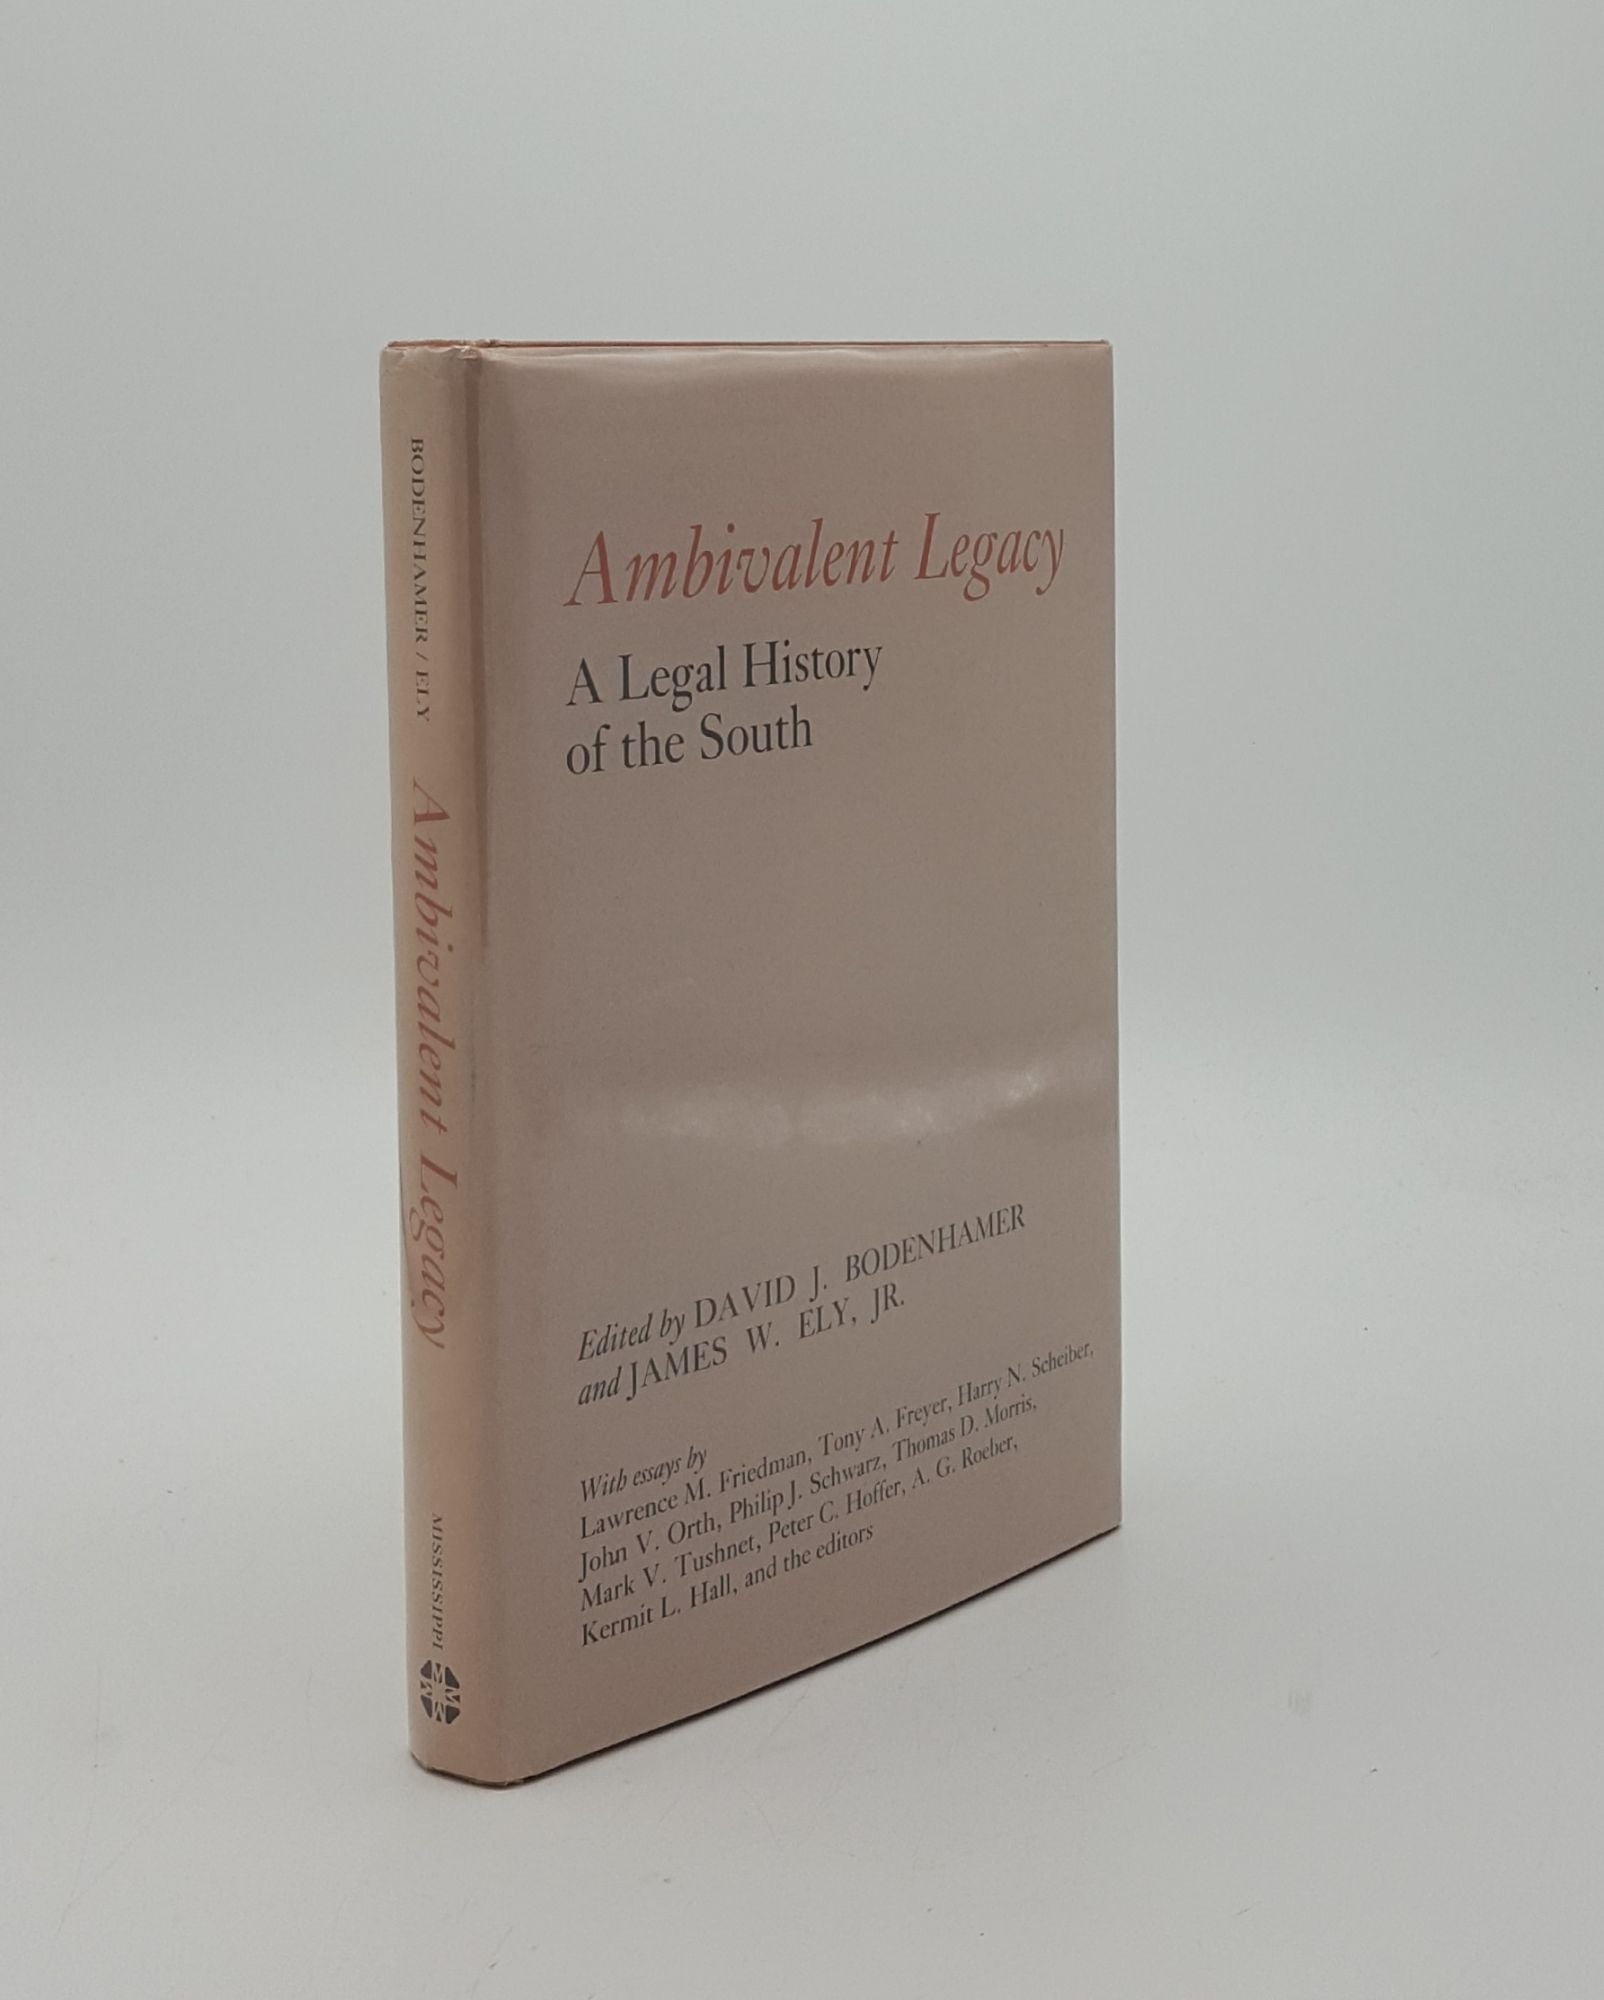 BODENHAMER David J., ELY James W. - Ambivalent Legacy a Legal History of the South